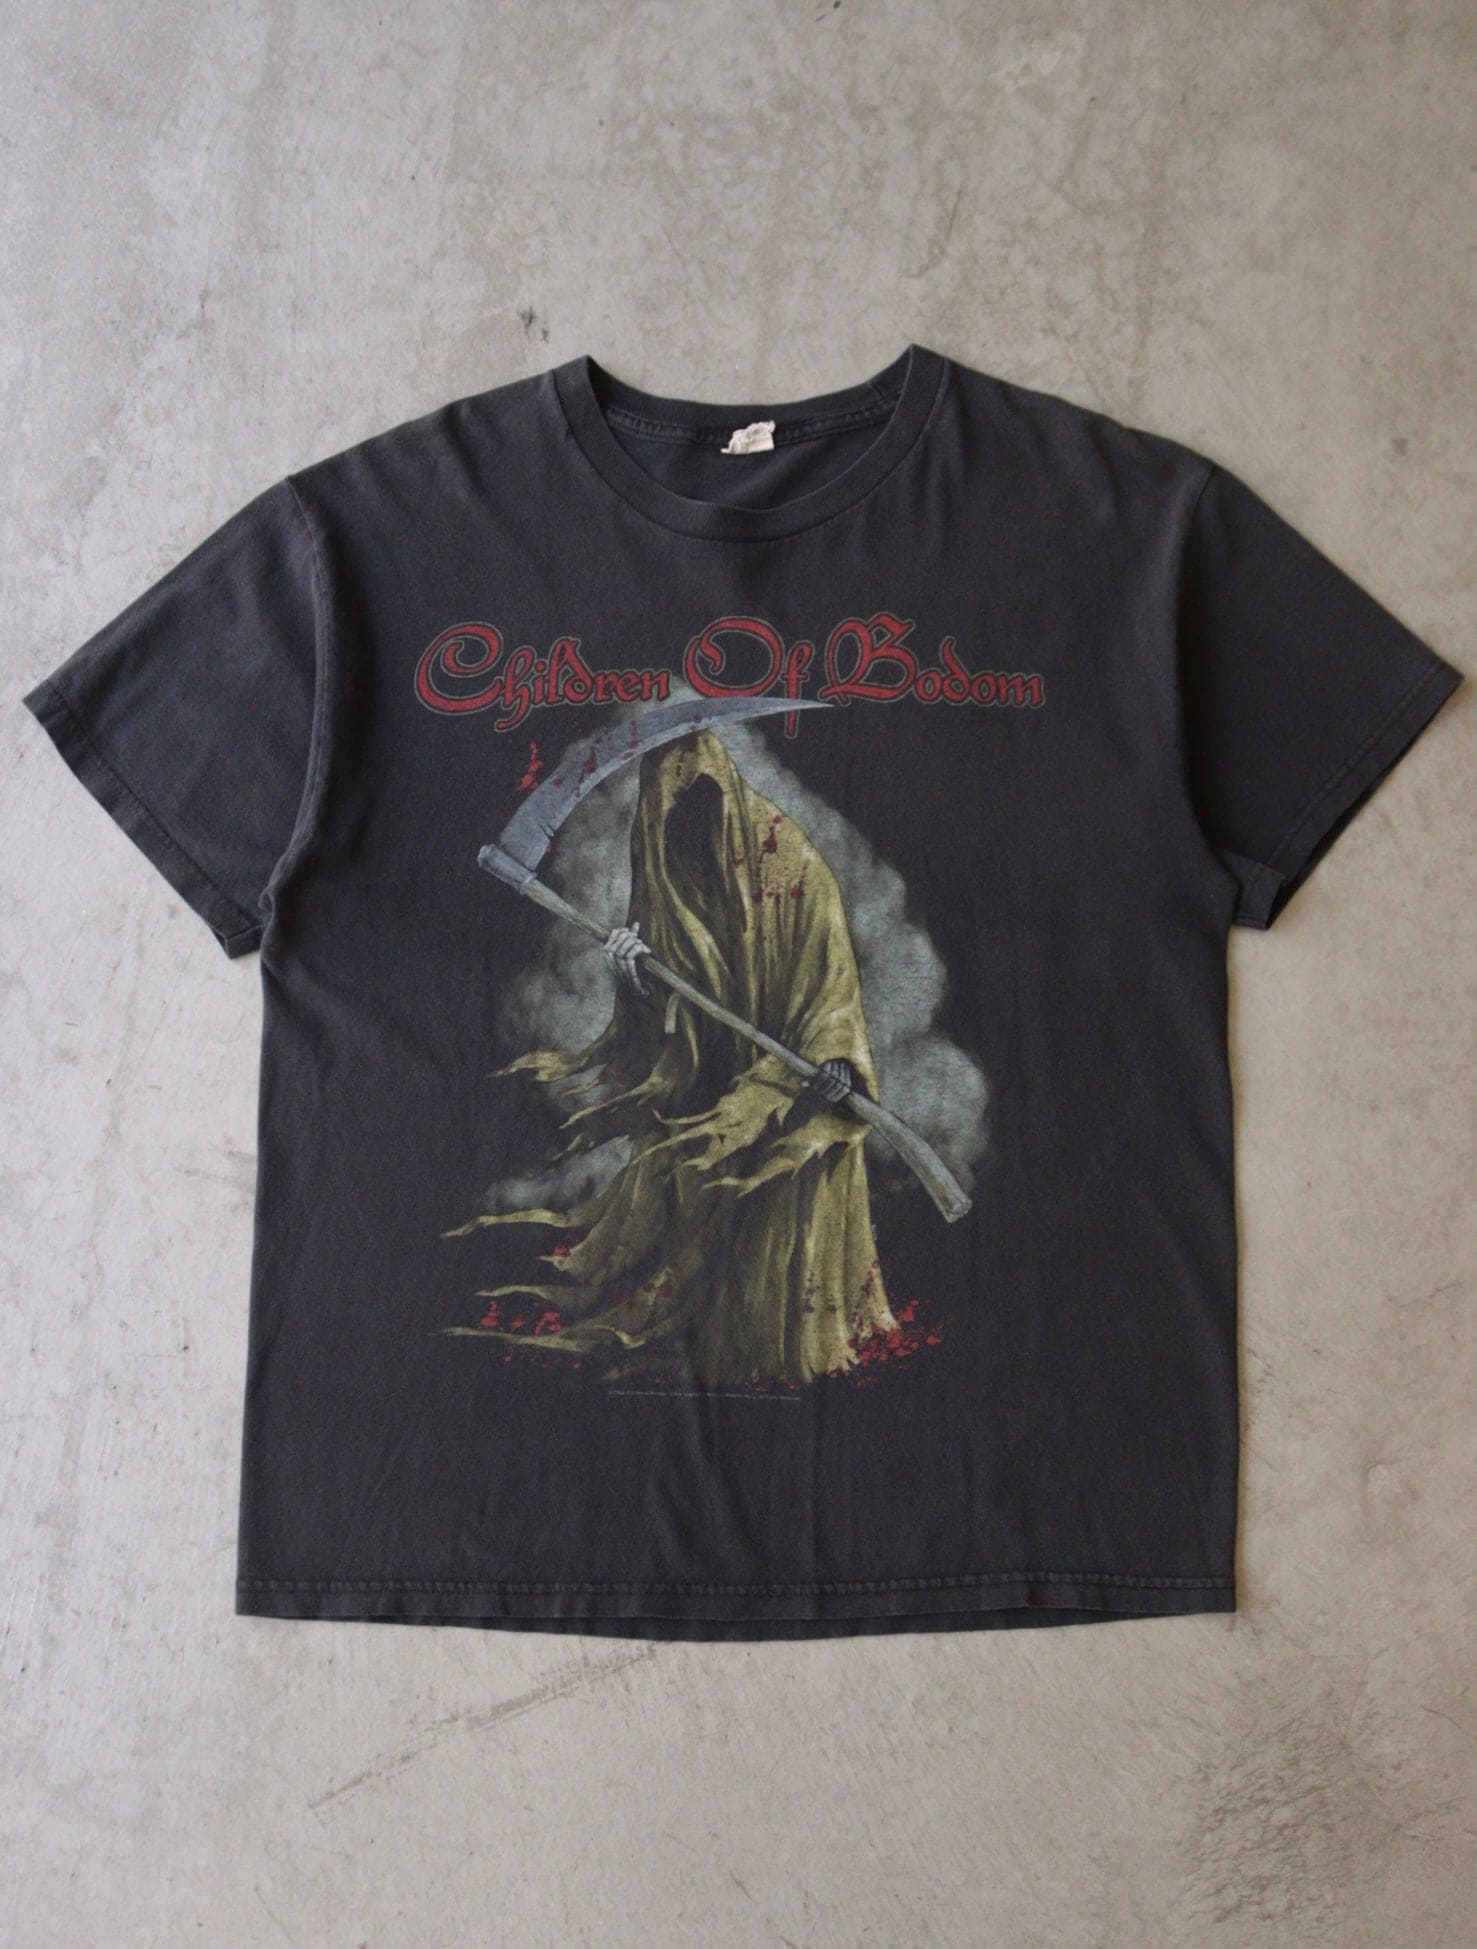 2000S CHILDREN OF BODOM BAND TEE